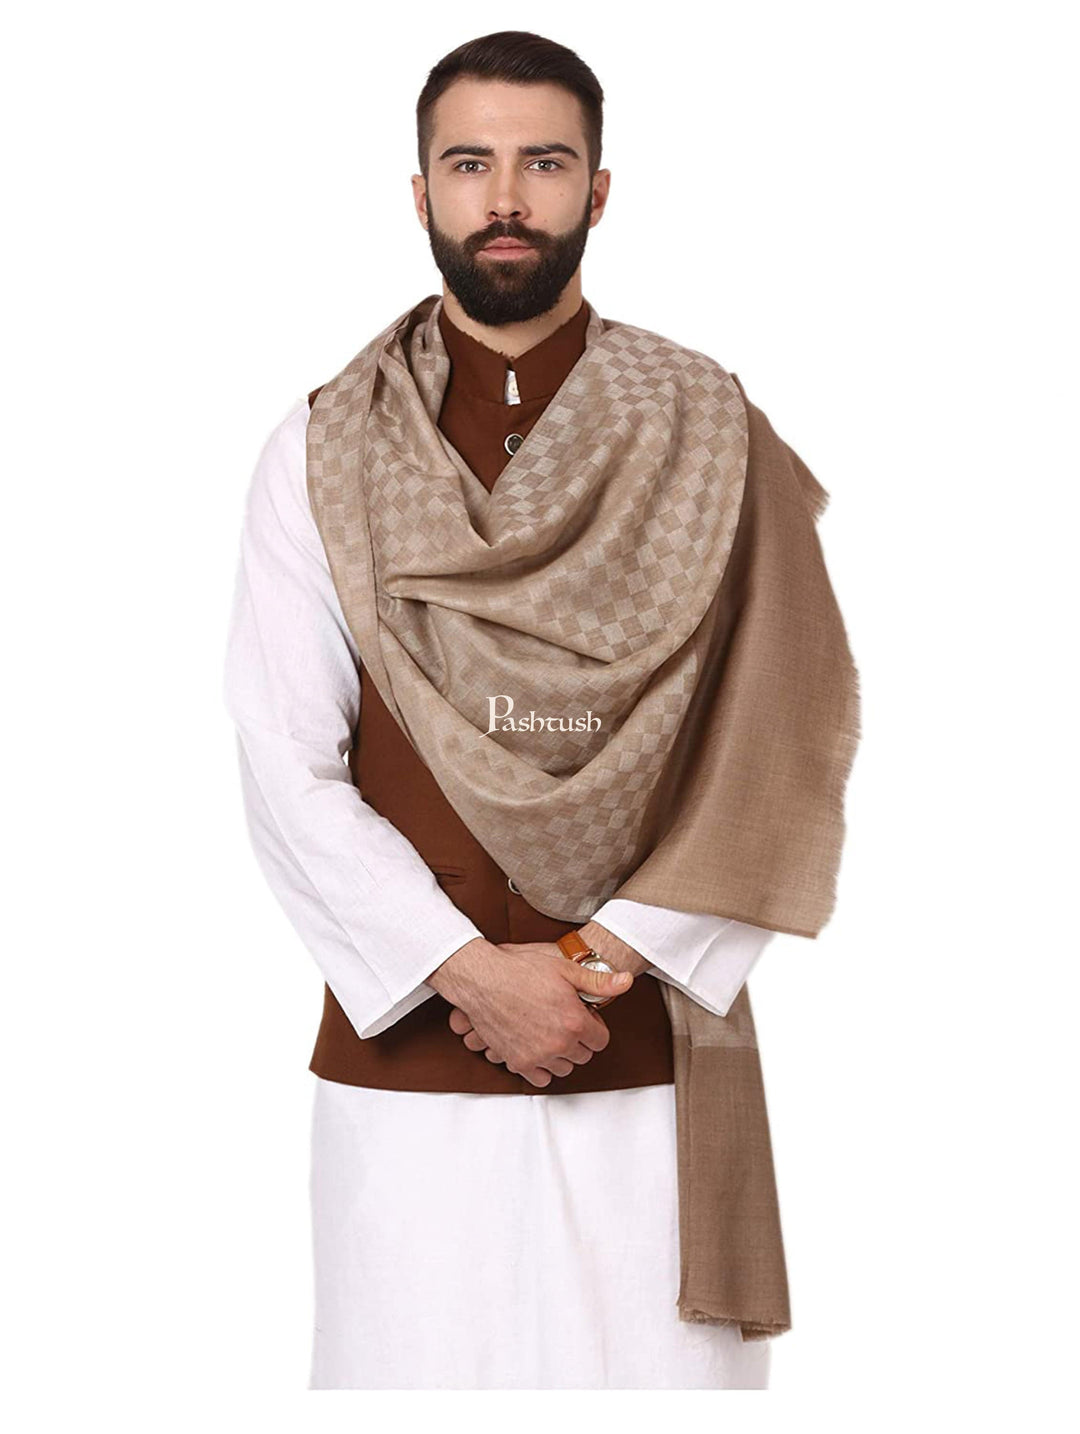 Pashtush India Mens Scarves Stoles and Mufflers Pashtush Mens Stole, Checkered Design, Extra-Soft Cashmere Feel, Taupe